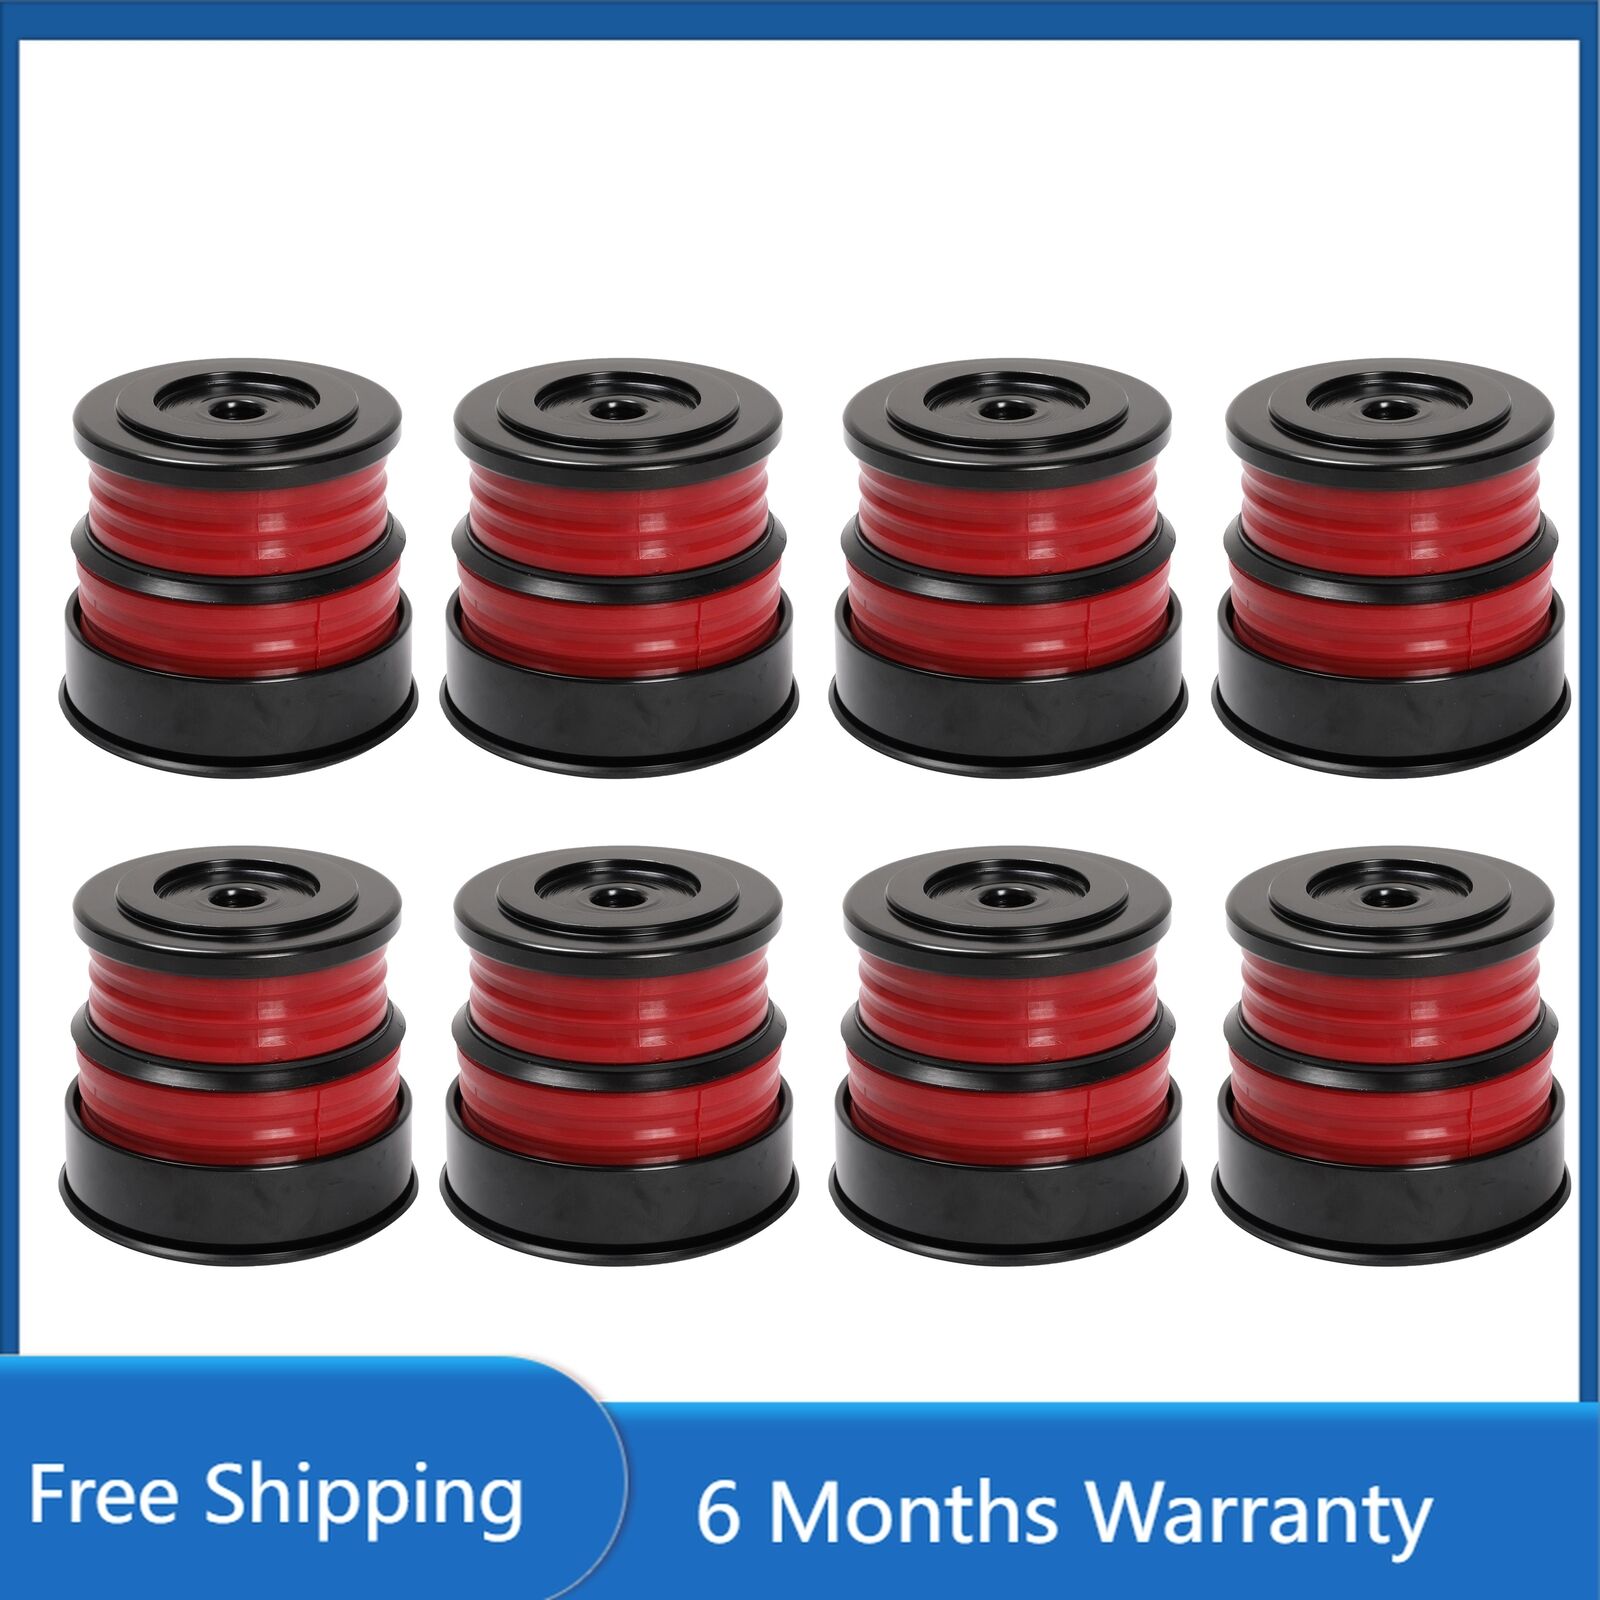 Silicone Body Mount Bushings Kit for Ford Super Duty F-250/F-350 Crew Cab 08-16